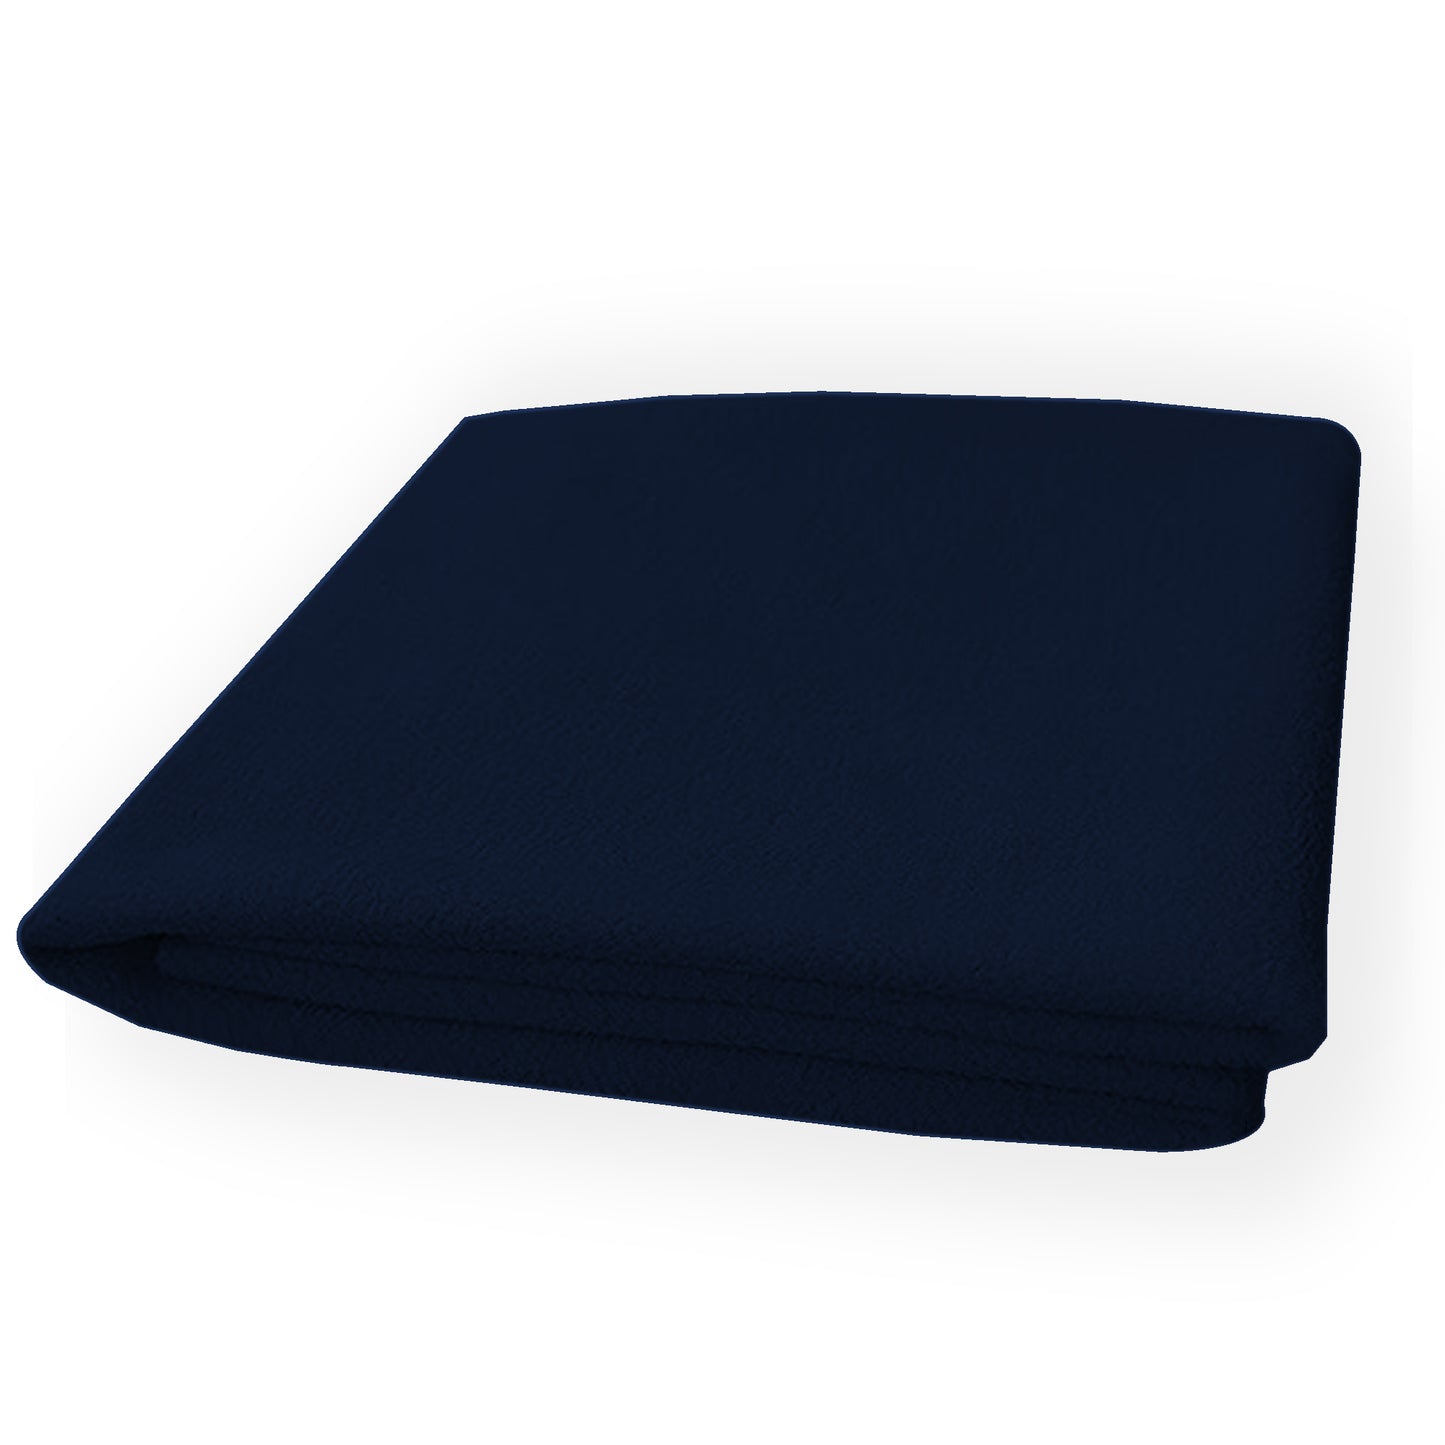 Waterproof Bed Protector, Extra Absorbent Quick Dry Sheet, Baby Bed Protector (70 X 50 CM), Pack of 2 -NAVY BLUE